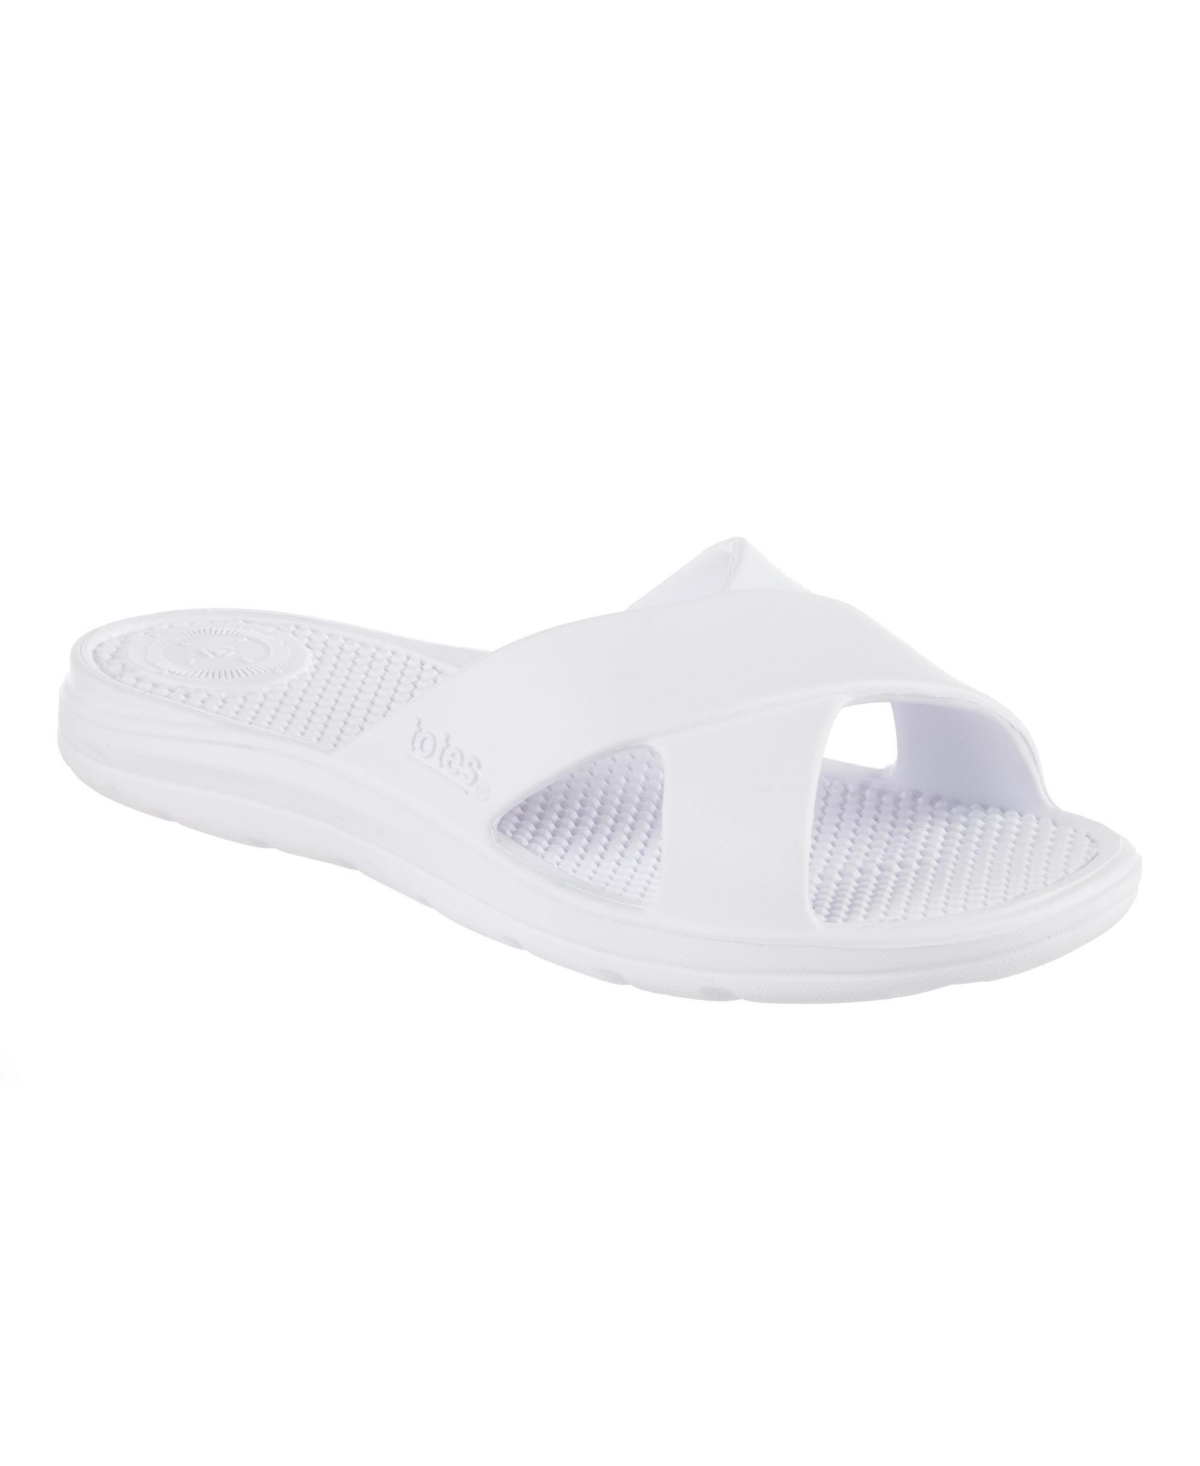 Totes Women's Molded Cross Slide Sandals With Everywear In White